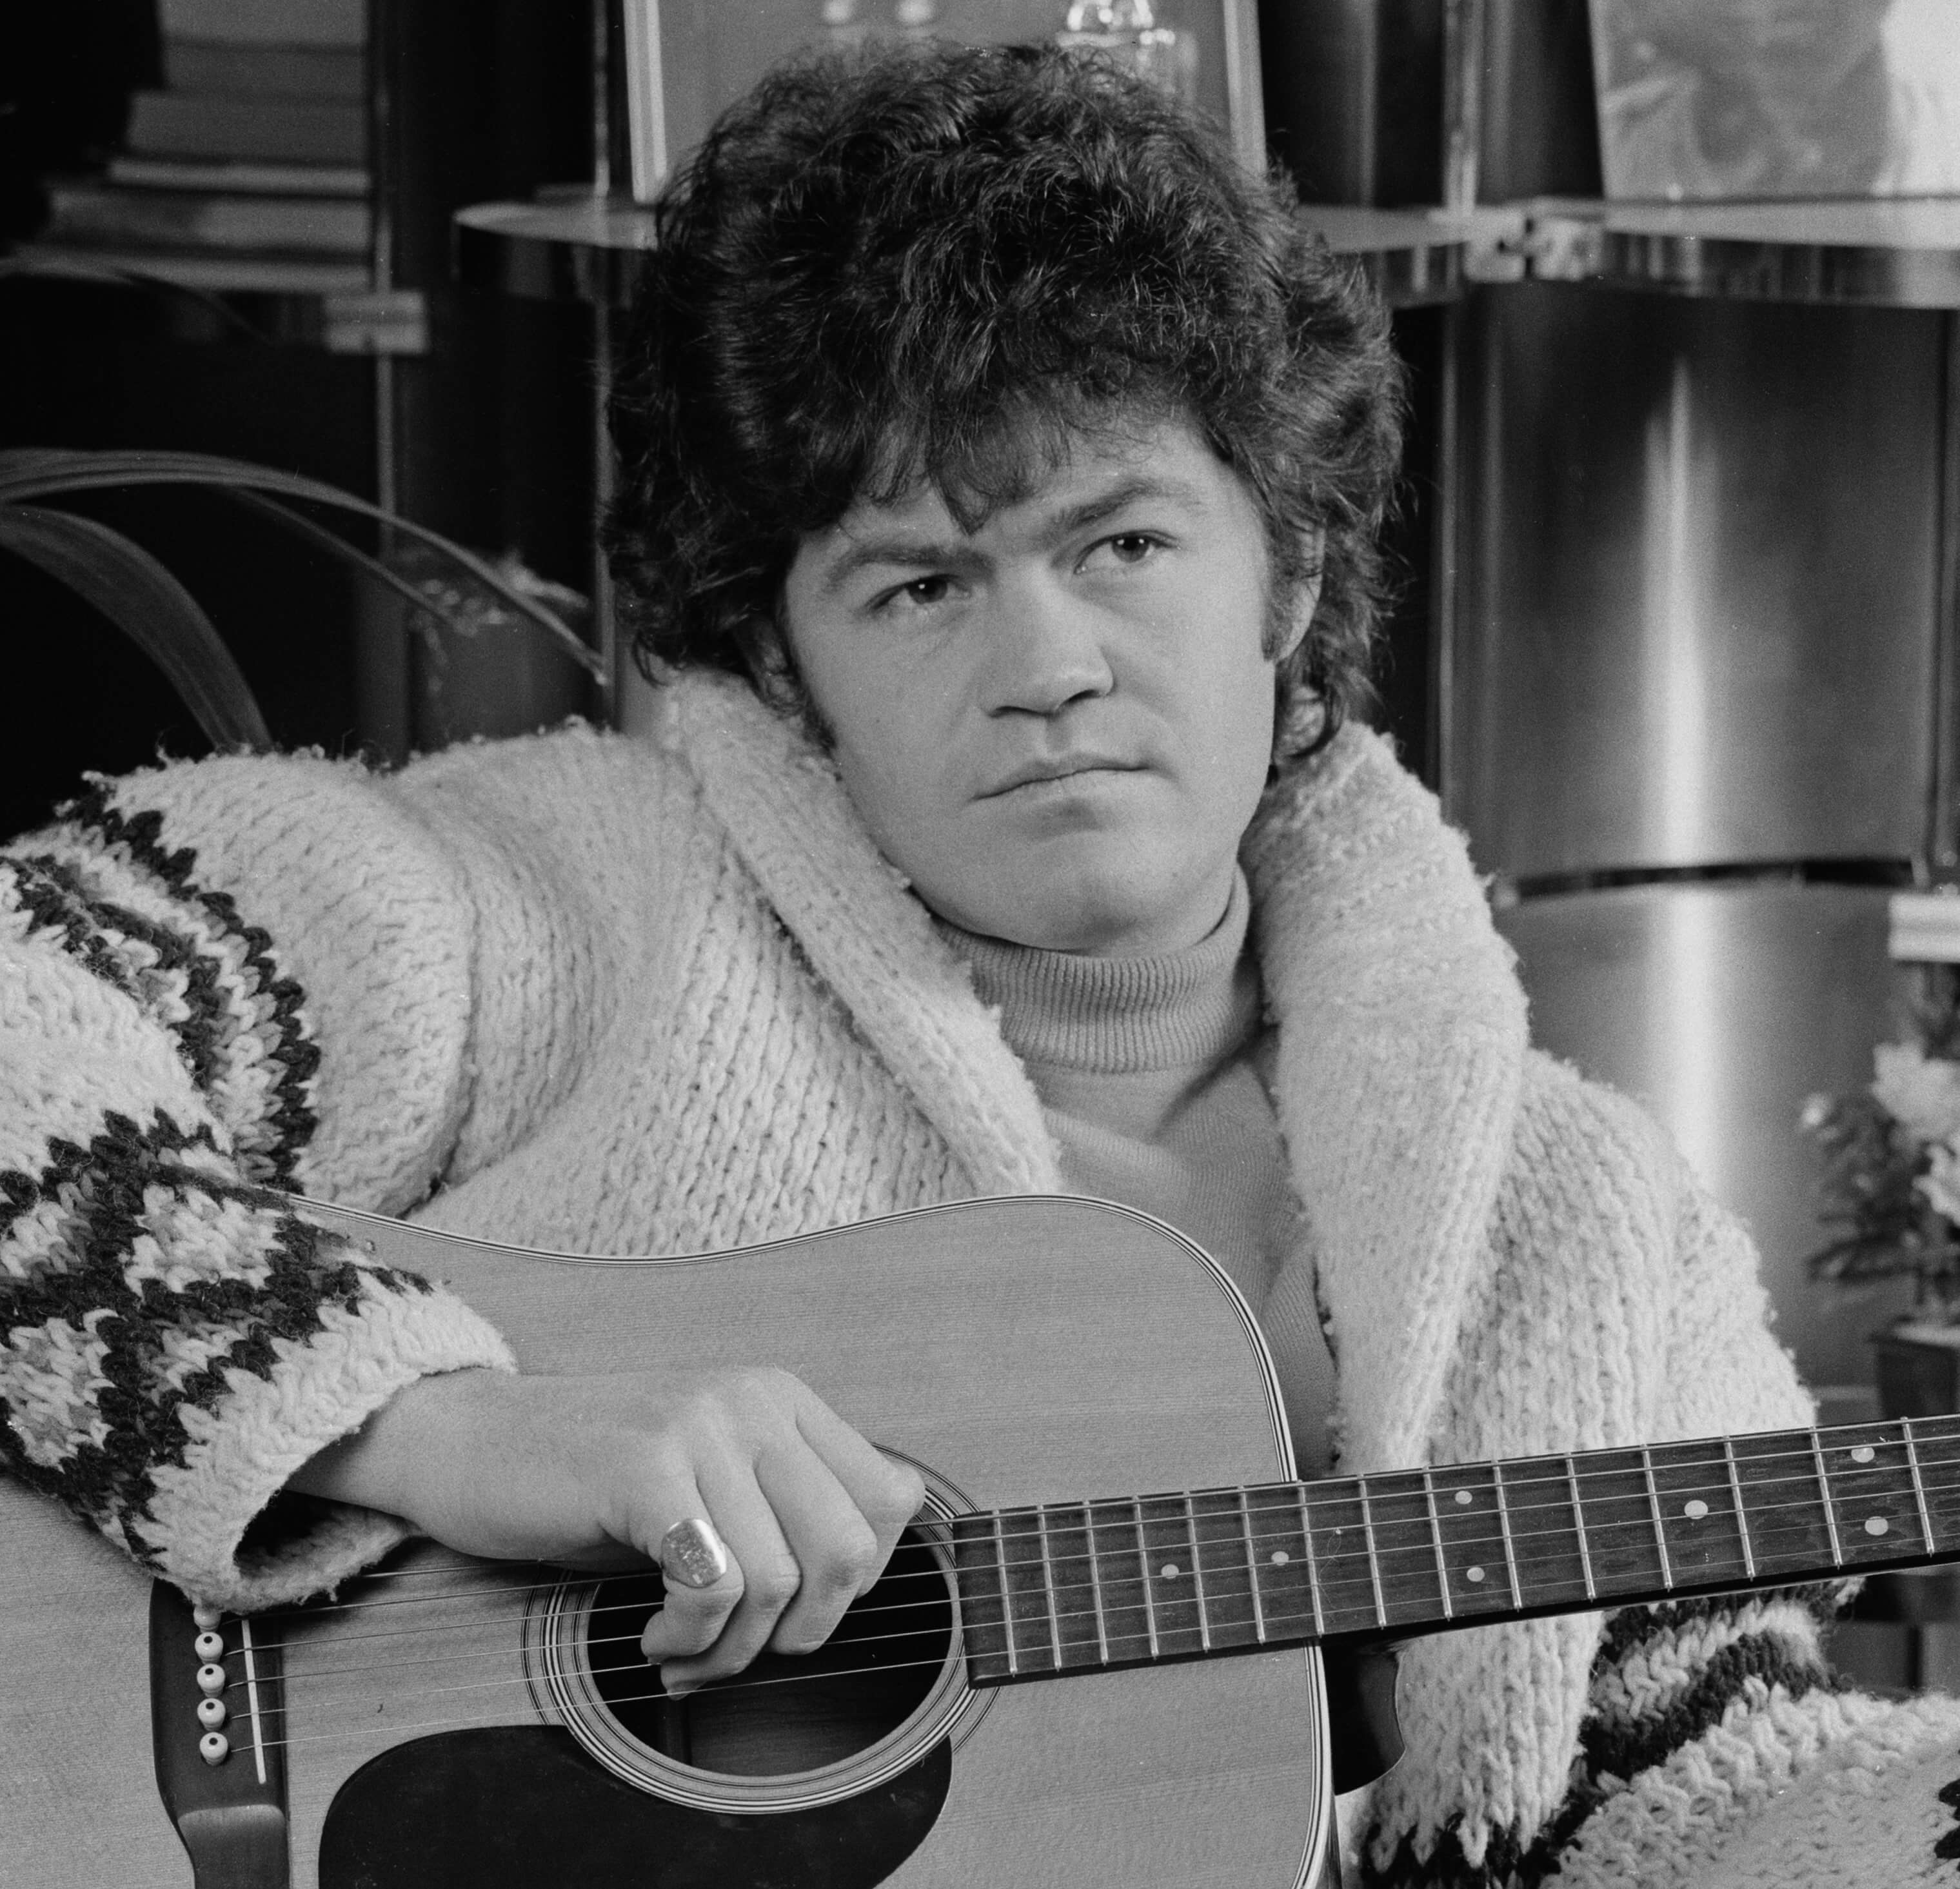 The Monkees' Micky Dolenz with his guitar